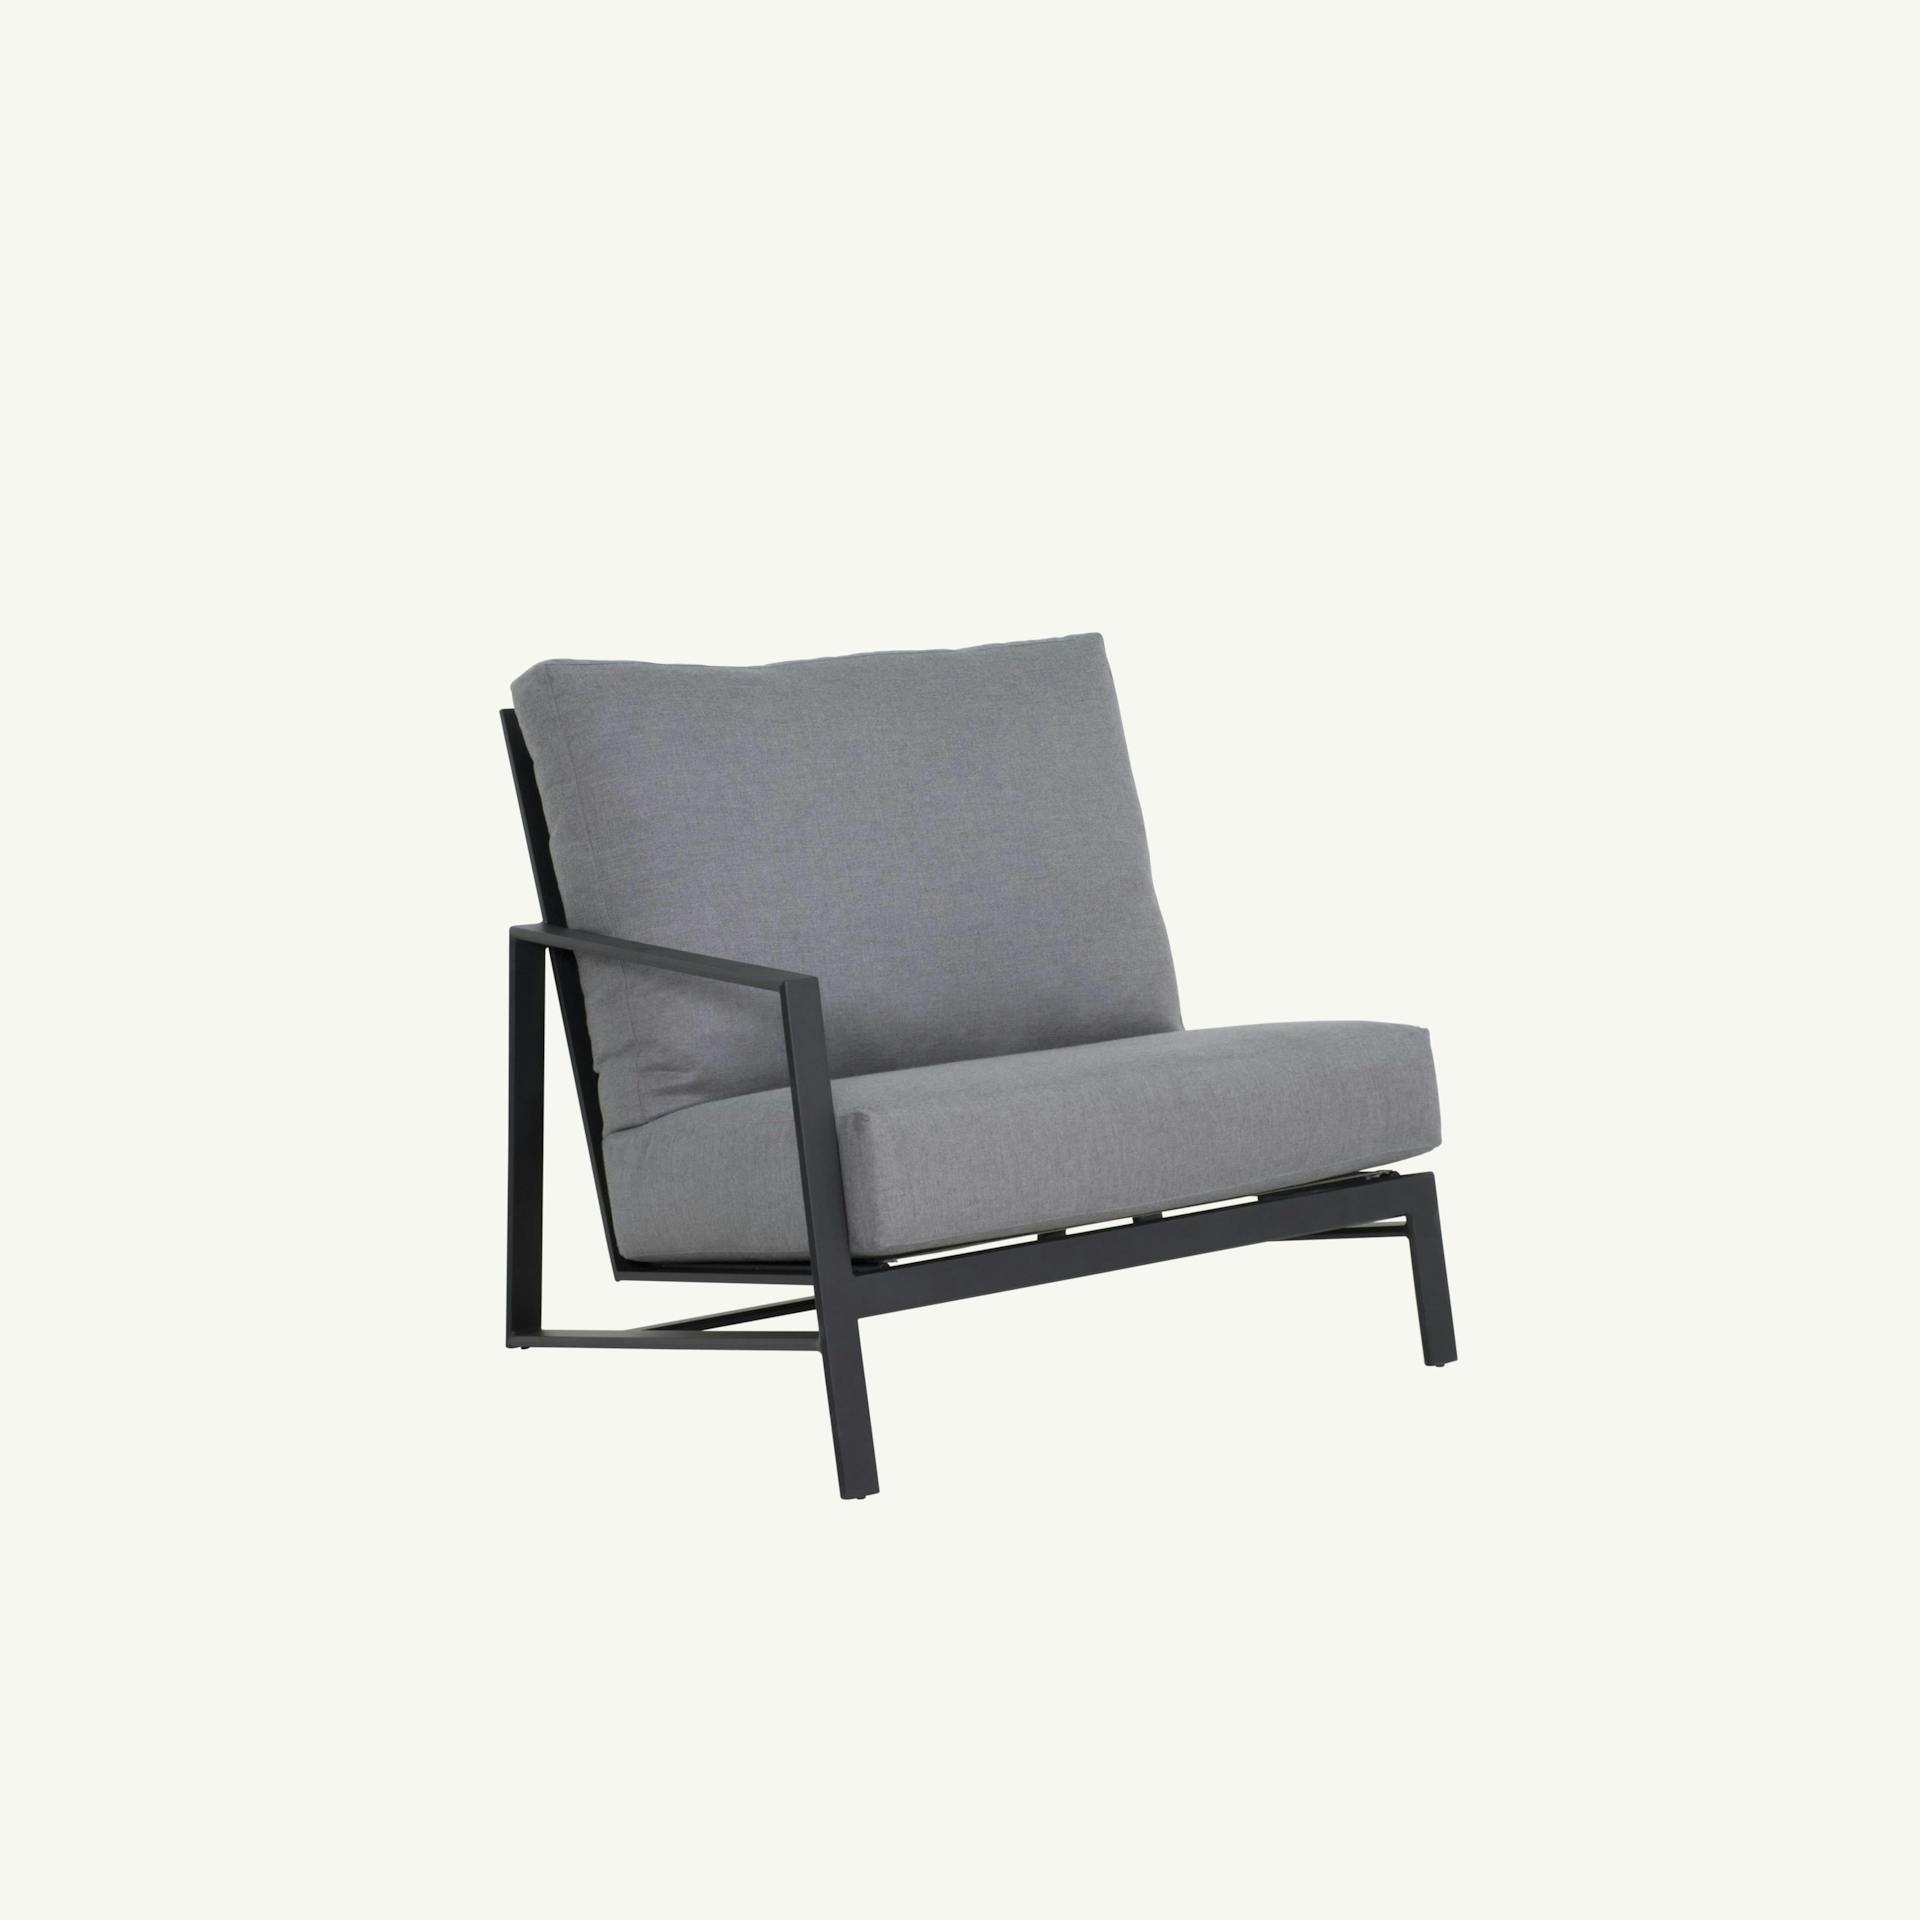 Prism Sectional Right Arm Lounge Unit